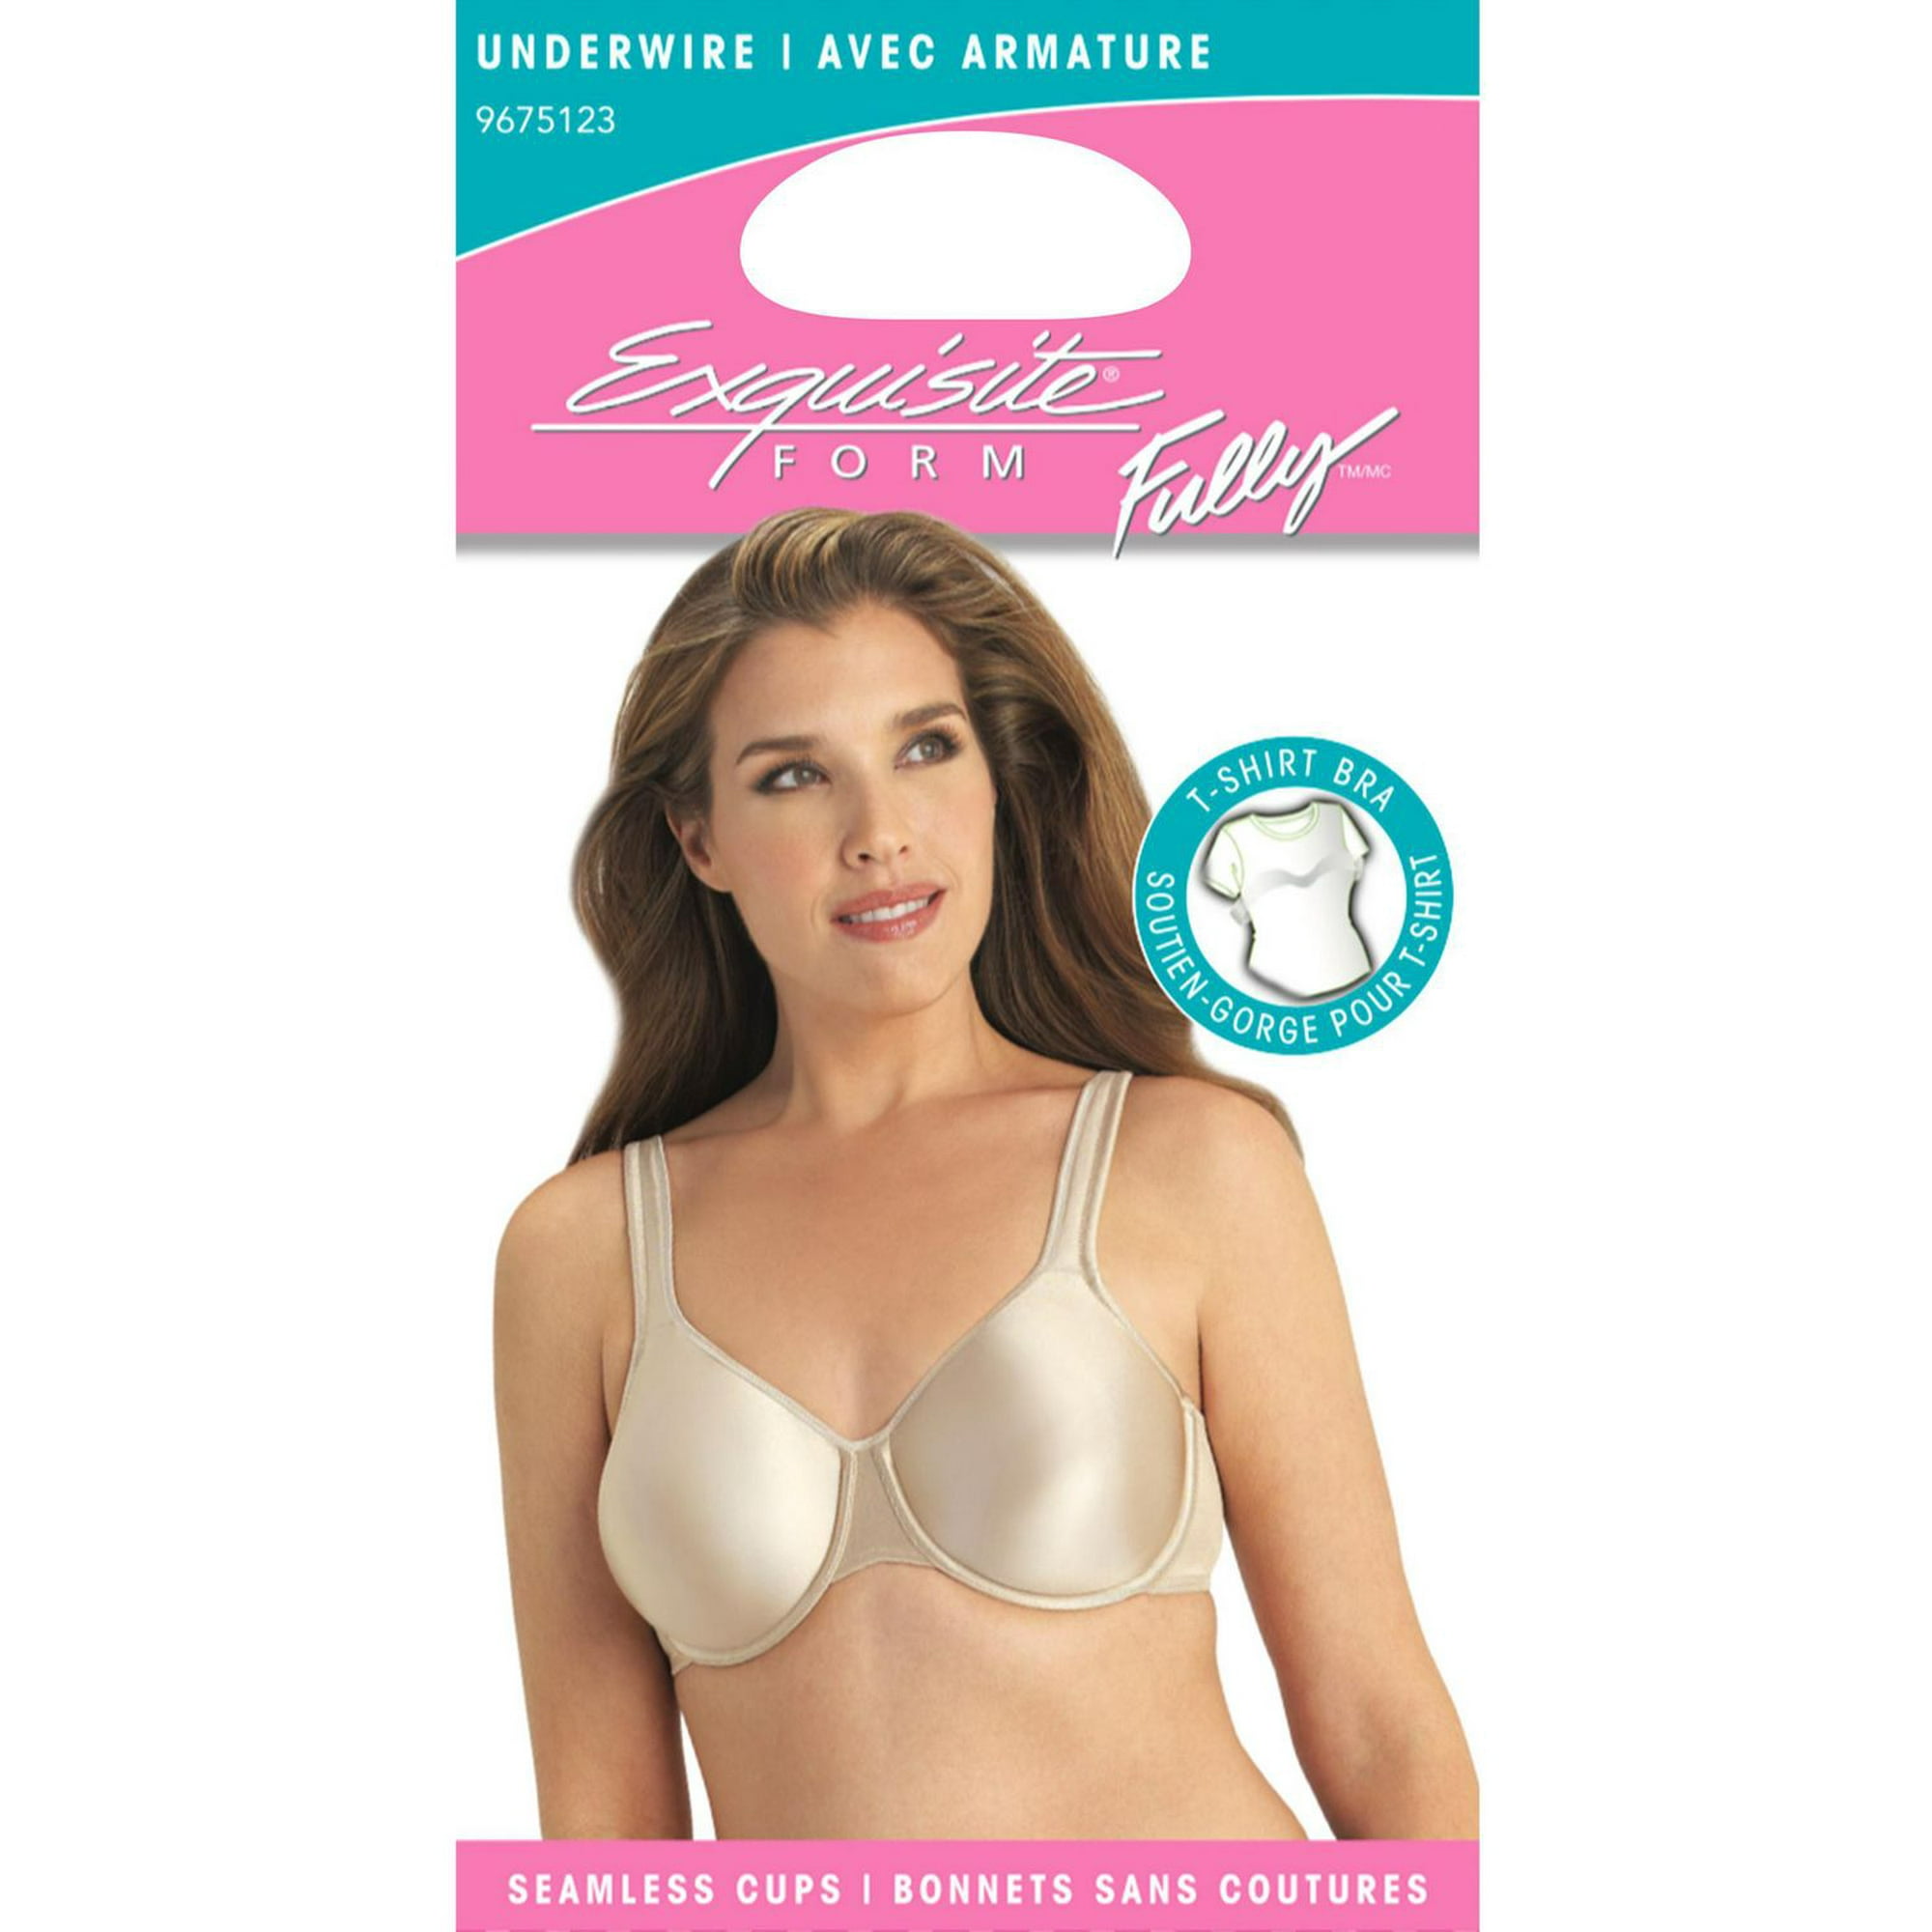 Exquisite Form #9675123 FULLY Full-Support T-Shirt Bra, Seamless